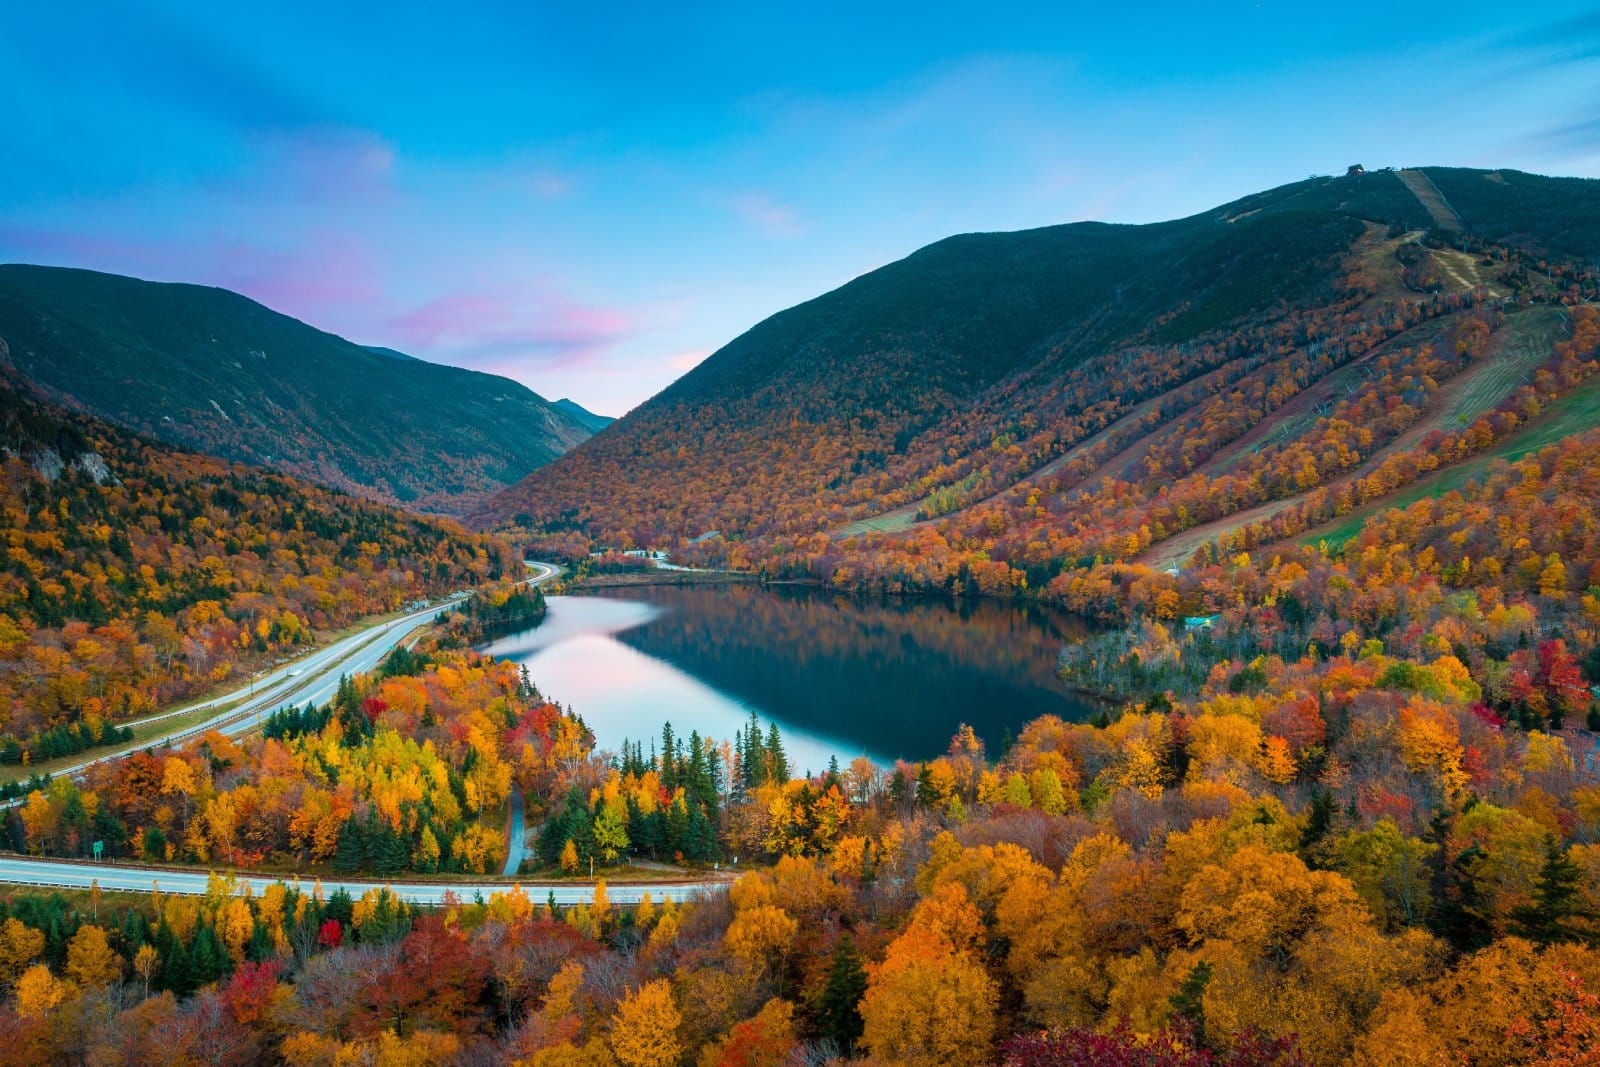 <p class="wp-caption-text">Image Credit: Shutterstock / Winston Tan</p>  <p><span>The White Mountains in New Hampshire offer camping and lodges, charming towns like Portsmouth, and scenic drives like the Kancamagus Highway.</span></p>